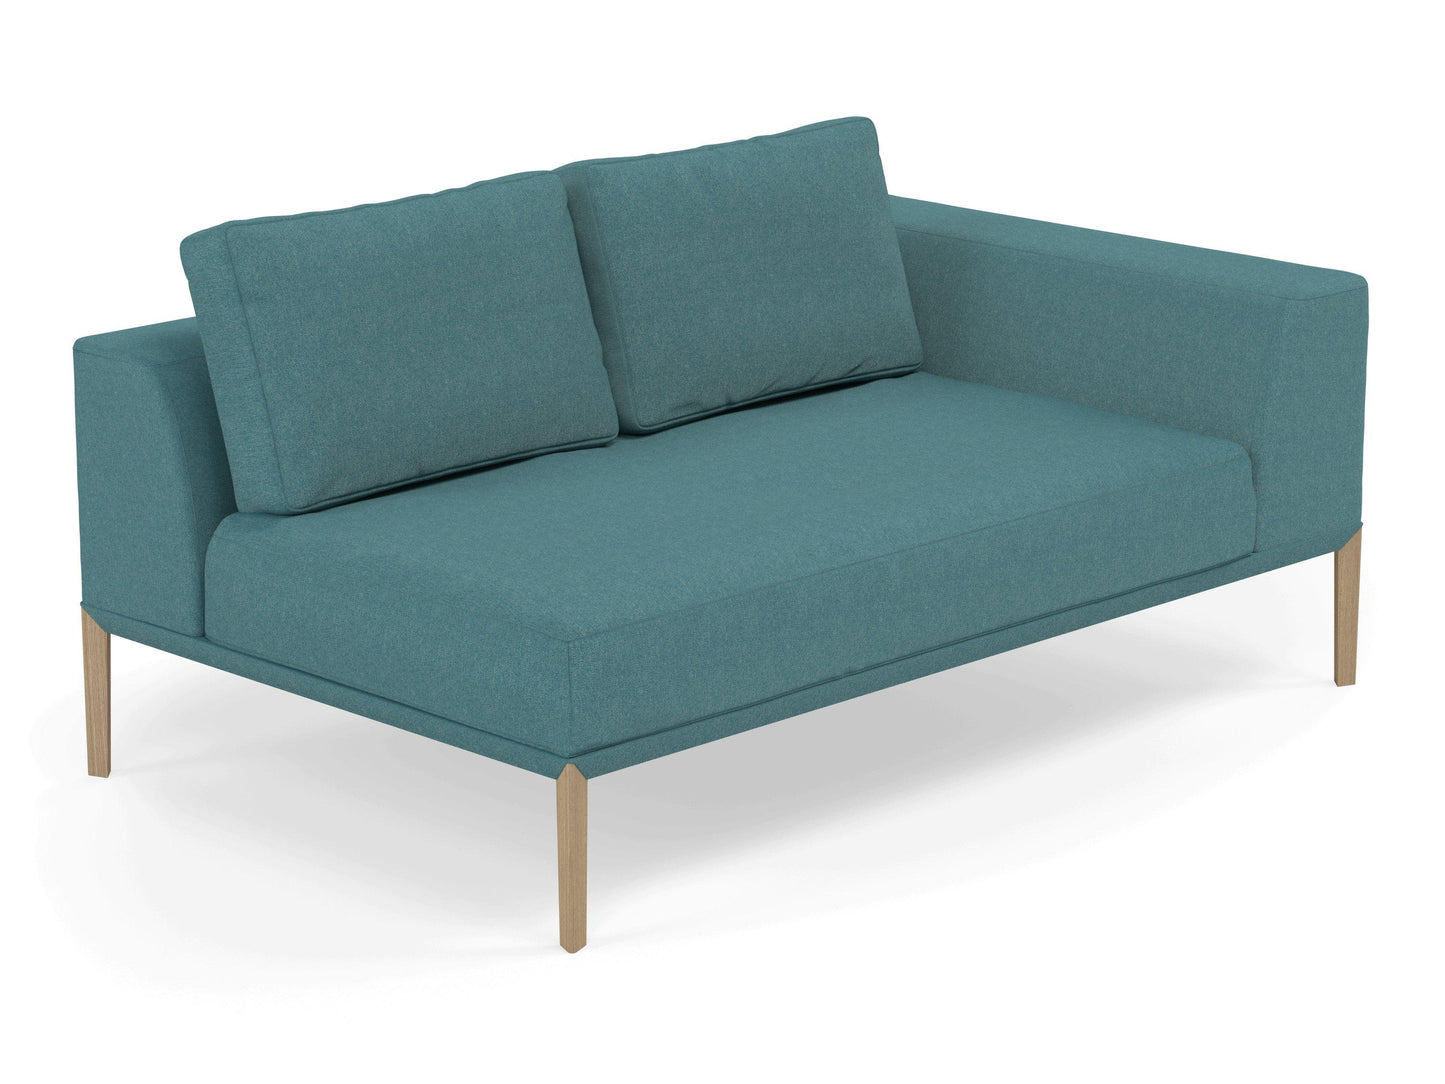 Modern 2 Seater Chaise Lounge Style Sofa with Left Armrest in Teal Blue Fabric-Distinct Designs (London) Ltd